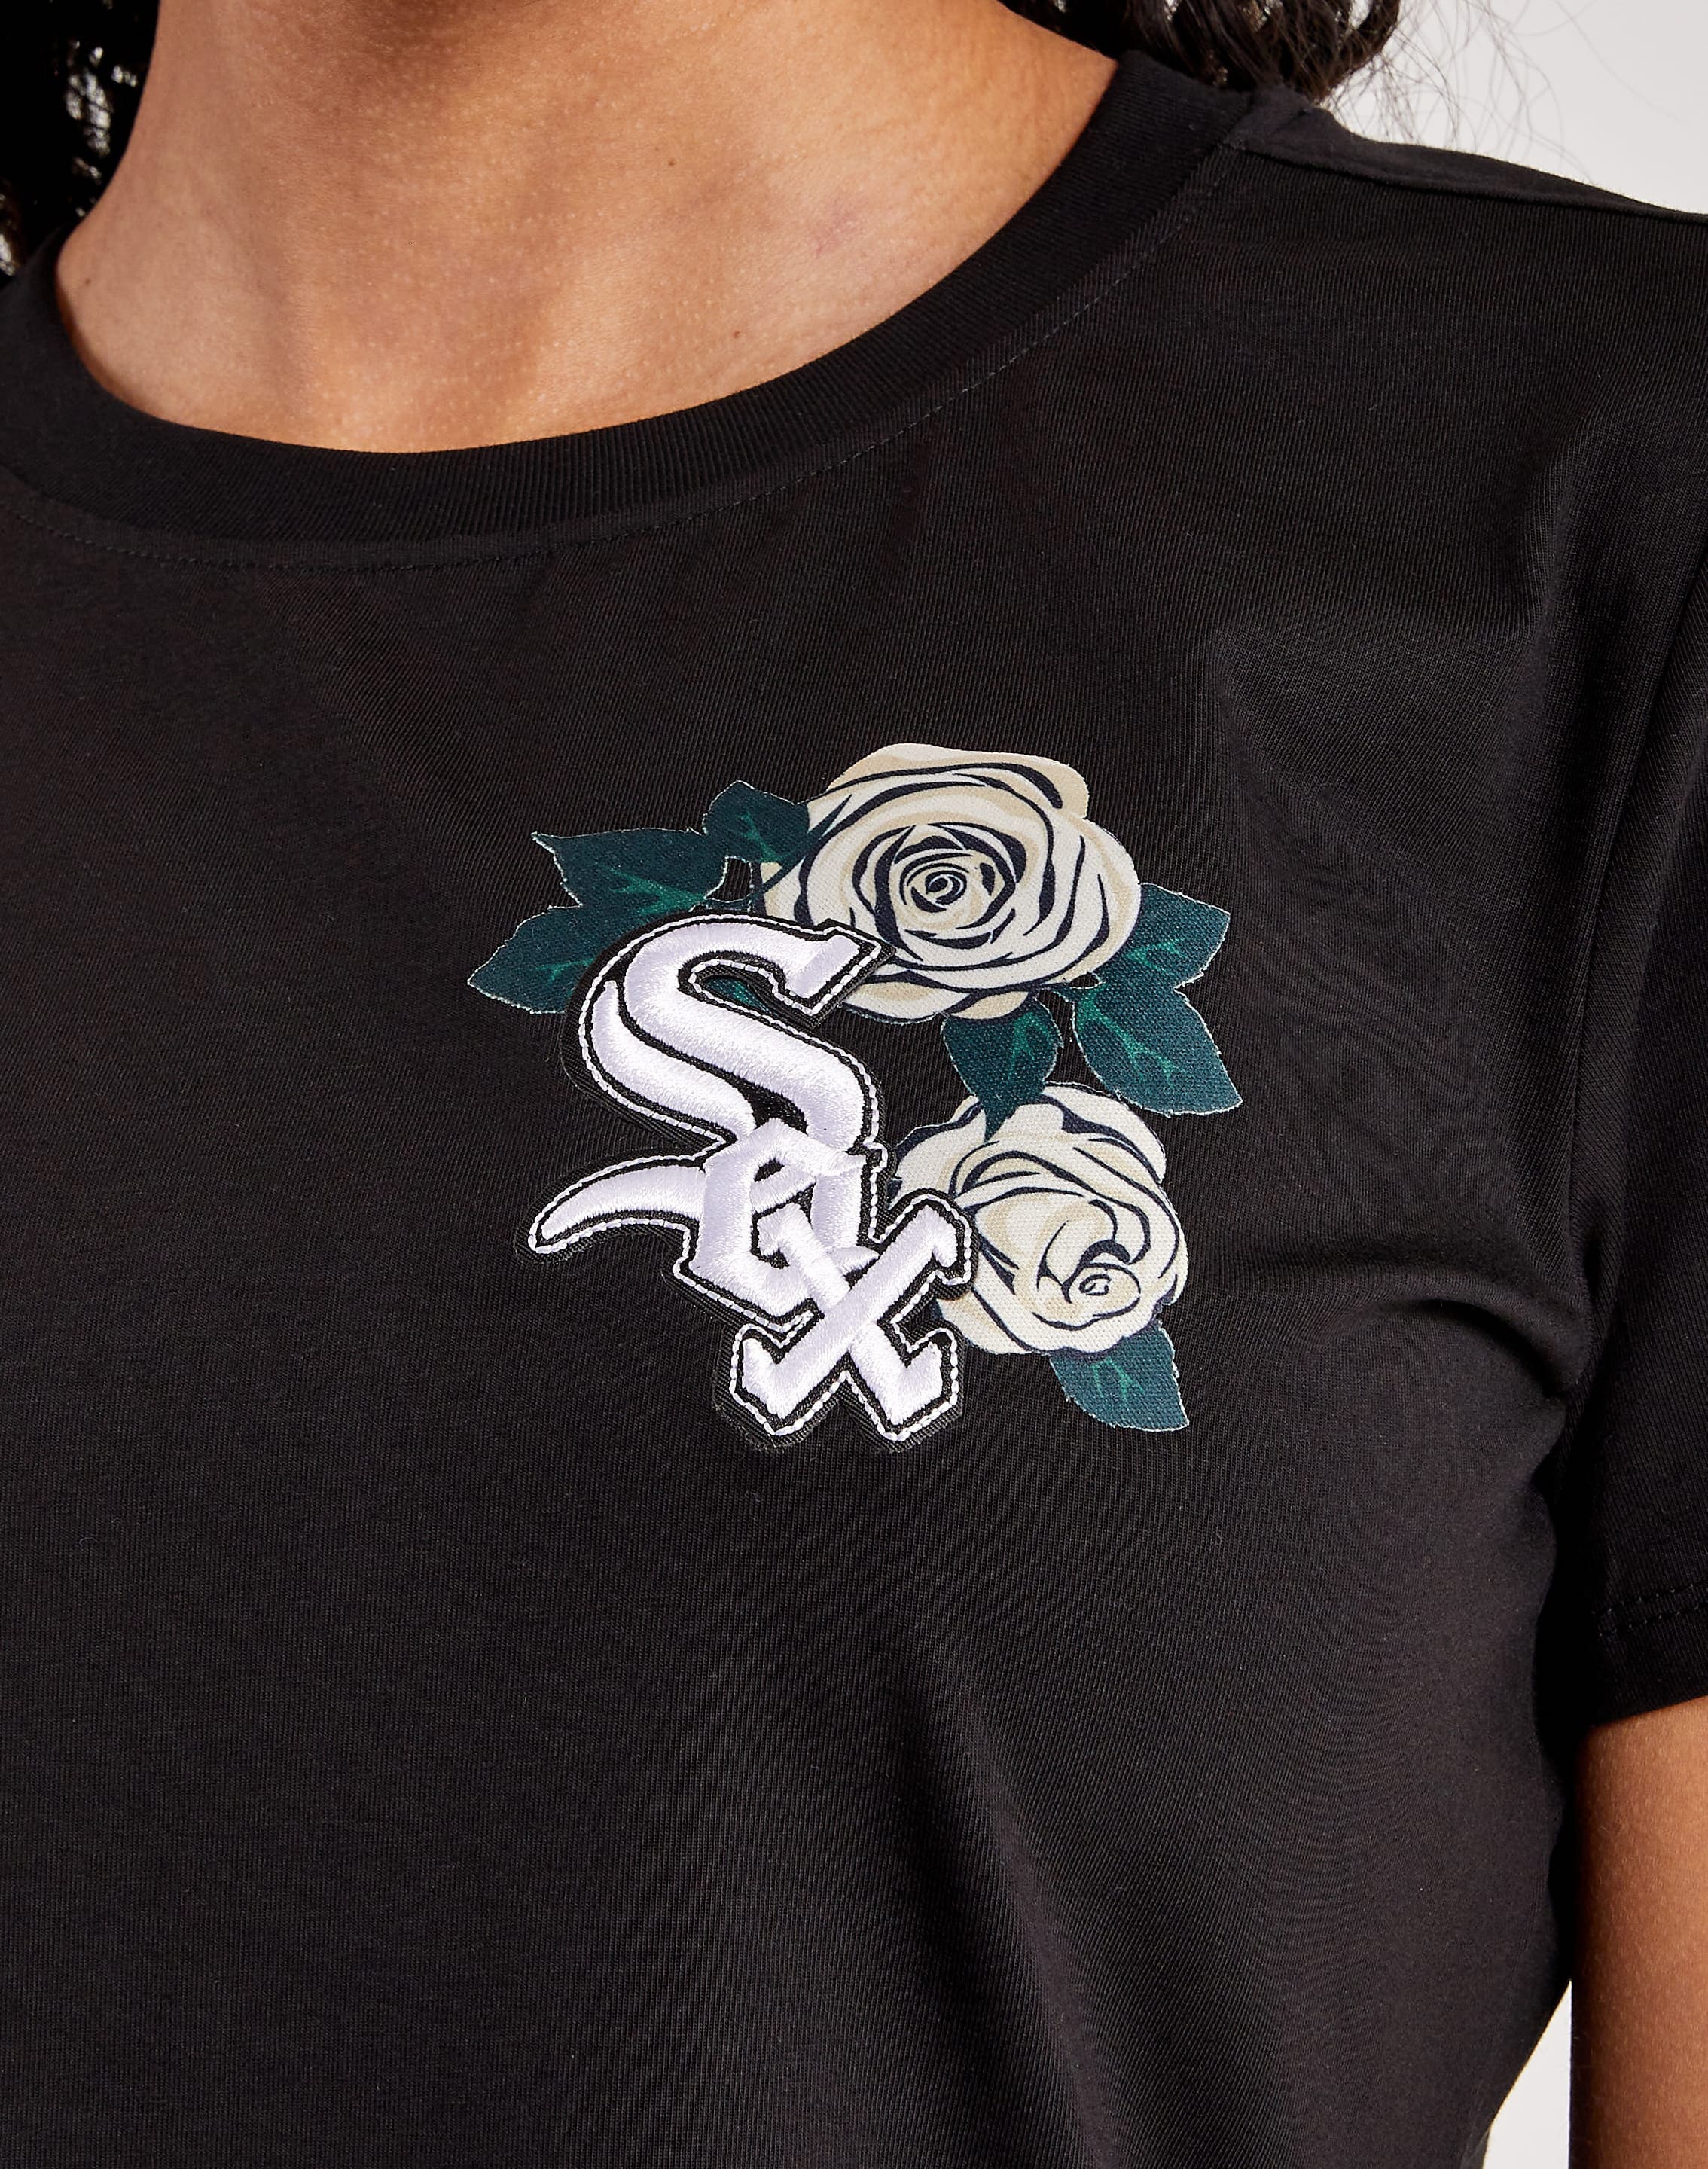 Pro Standard Chicago White Sox Tee